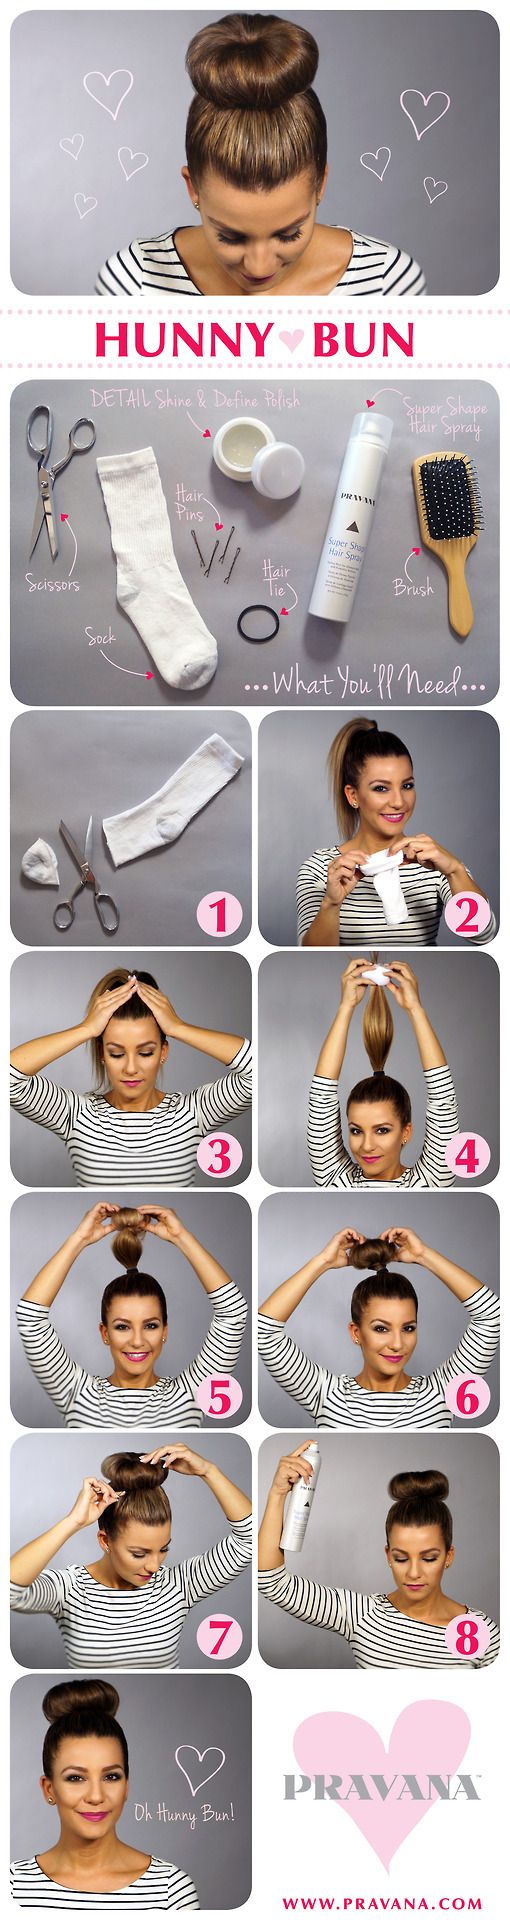 7 Easy Step by Step Hair Tutorials for Beginners - Pretty Designs